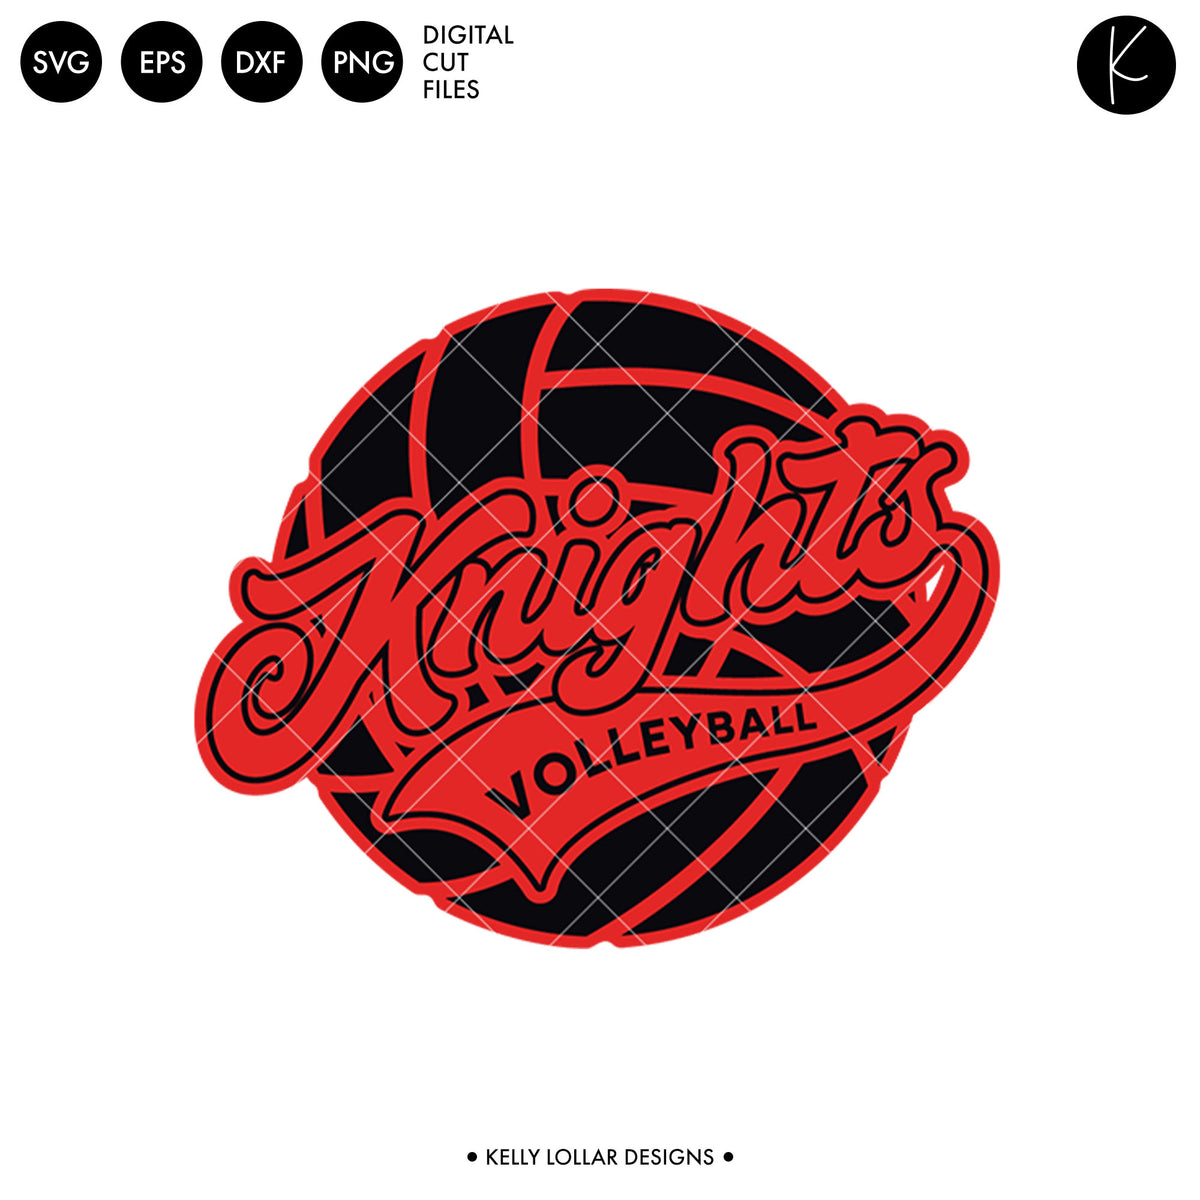 Knights Volleyball Bundle | SVG DXF EPS PNG Cut Files